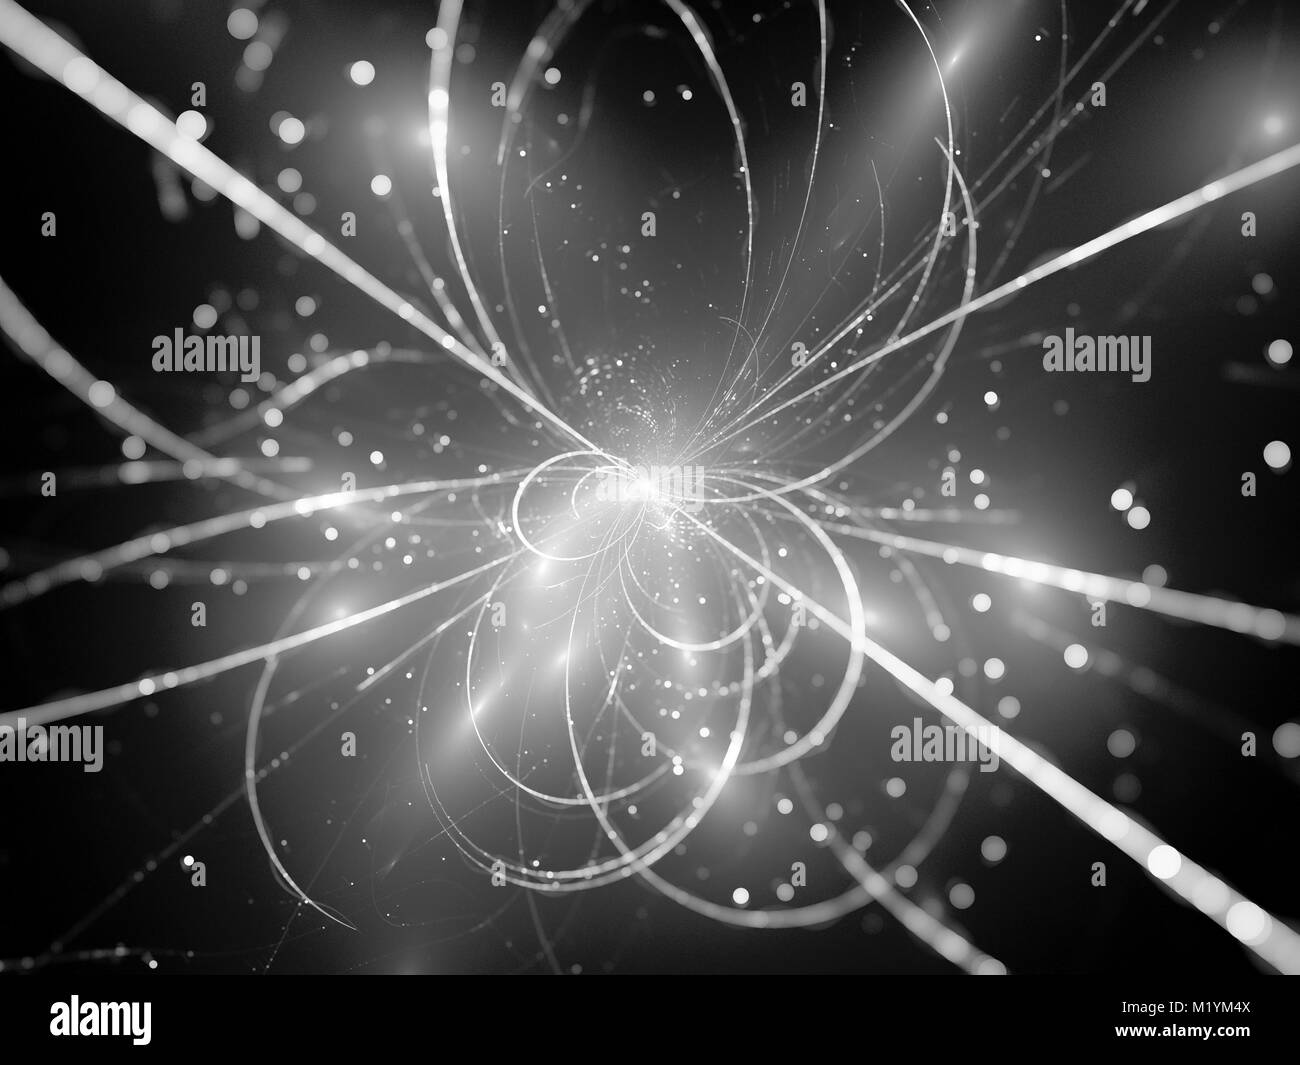 Glowing trajectories in space, computer generated abstract black and white texture, 3D rendering Stock Photo